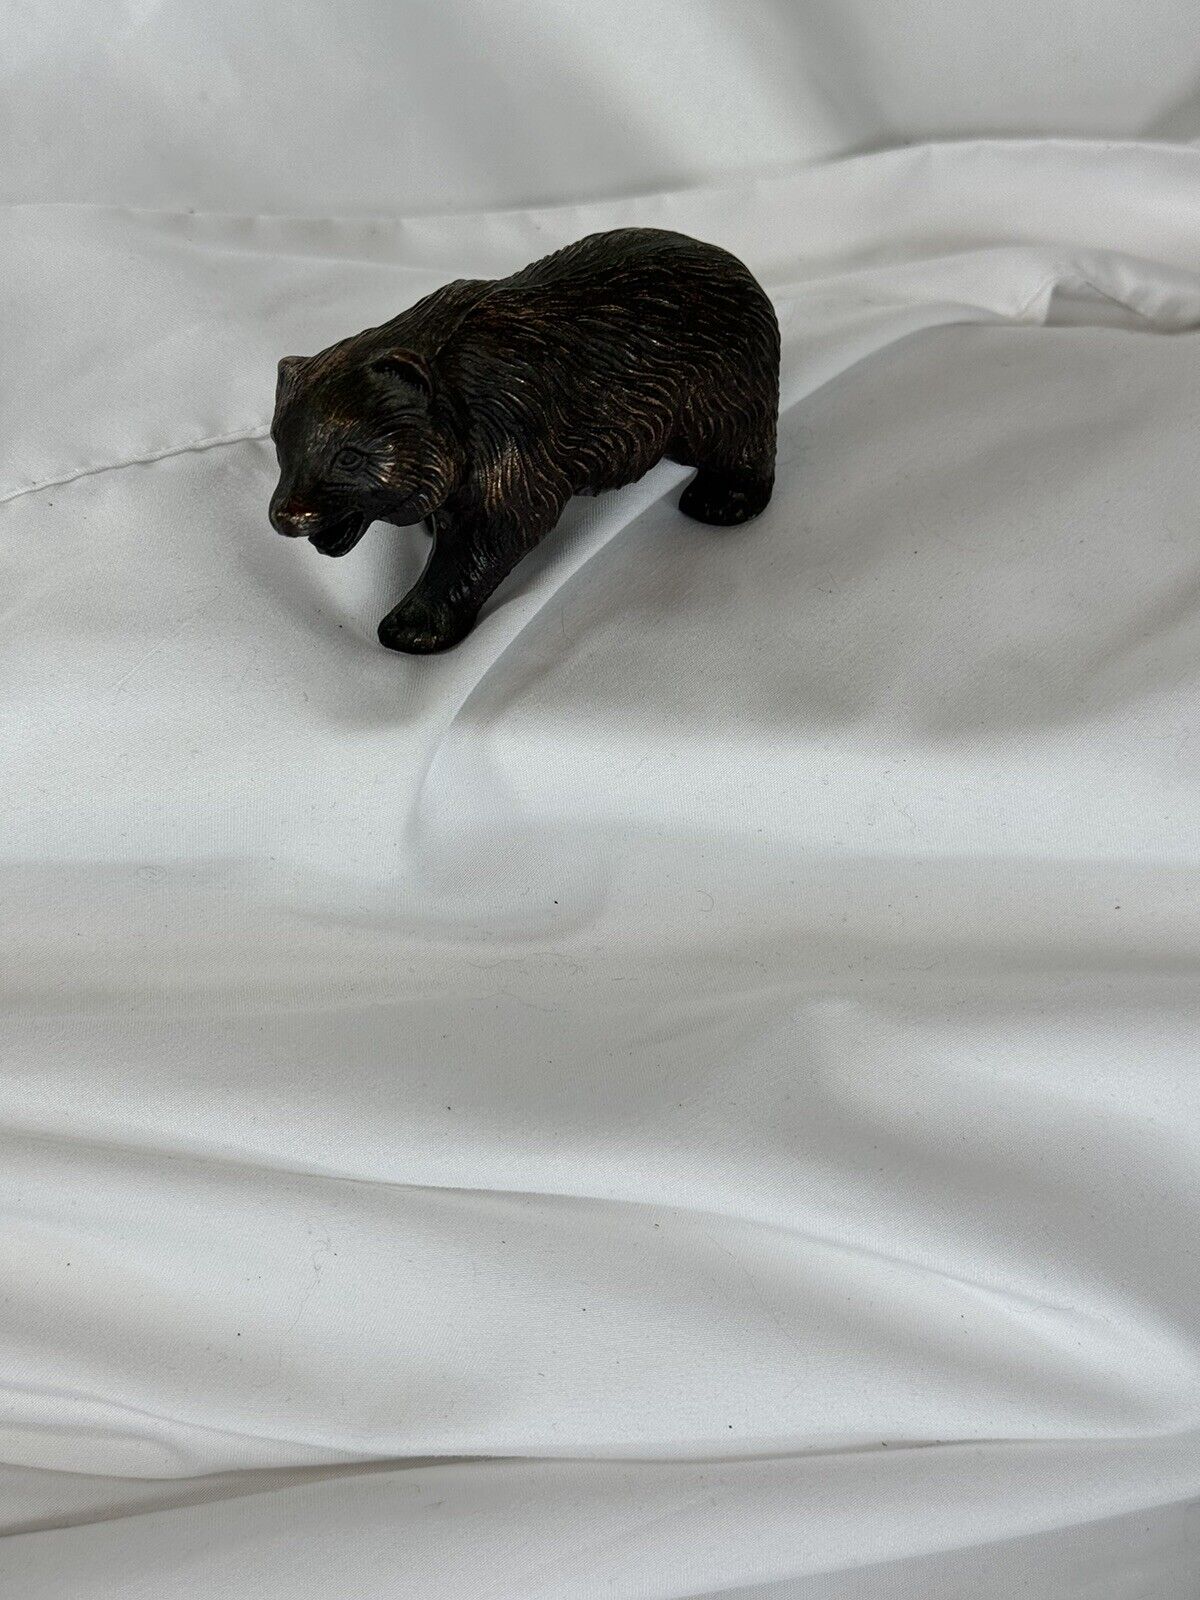 Small Vintage Bronze BROWN or GRIZZLY BEAR Figurine JAPAN